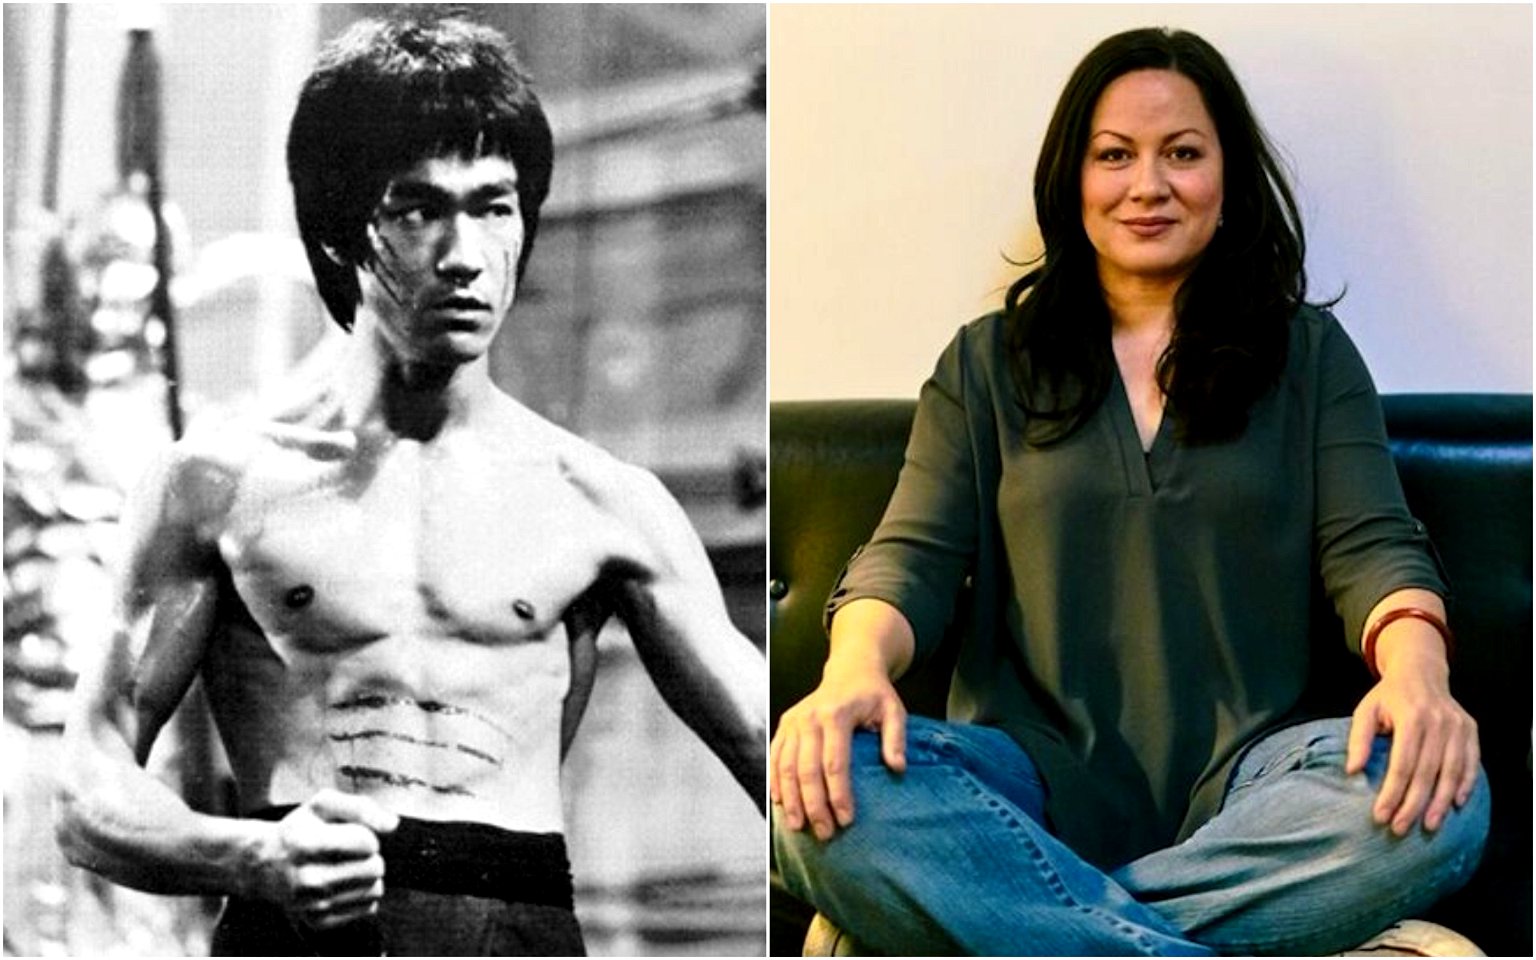 hundehvalp beskytte Mursten Bruce Lee Once Had a Dream That Hollywood Destroyed, Now His Daughter is  Bringing it Back to Life